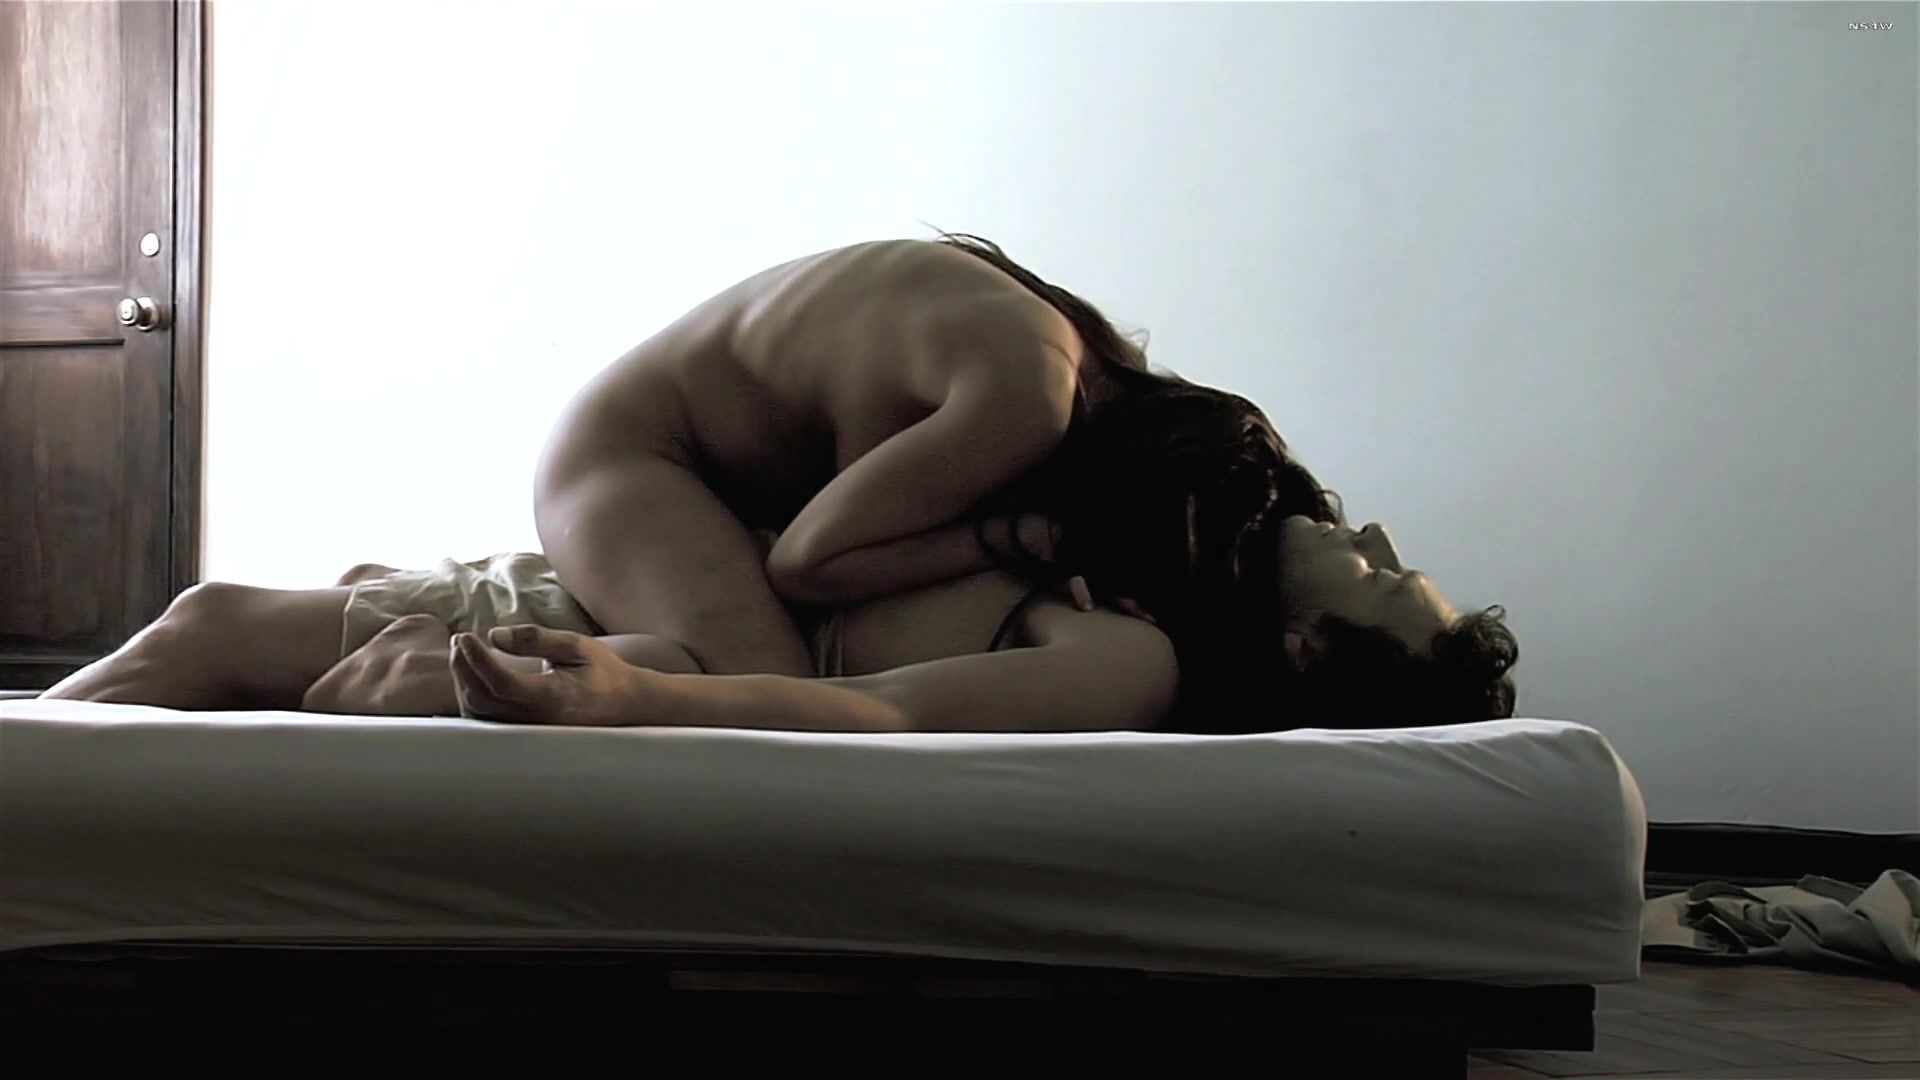 Sexu All Sex Scenes of the movie "Wake Up And Die" | Naked Actress: Andrea Montenegro | Released in 2011 Public Nudity - 1